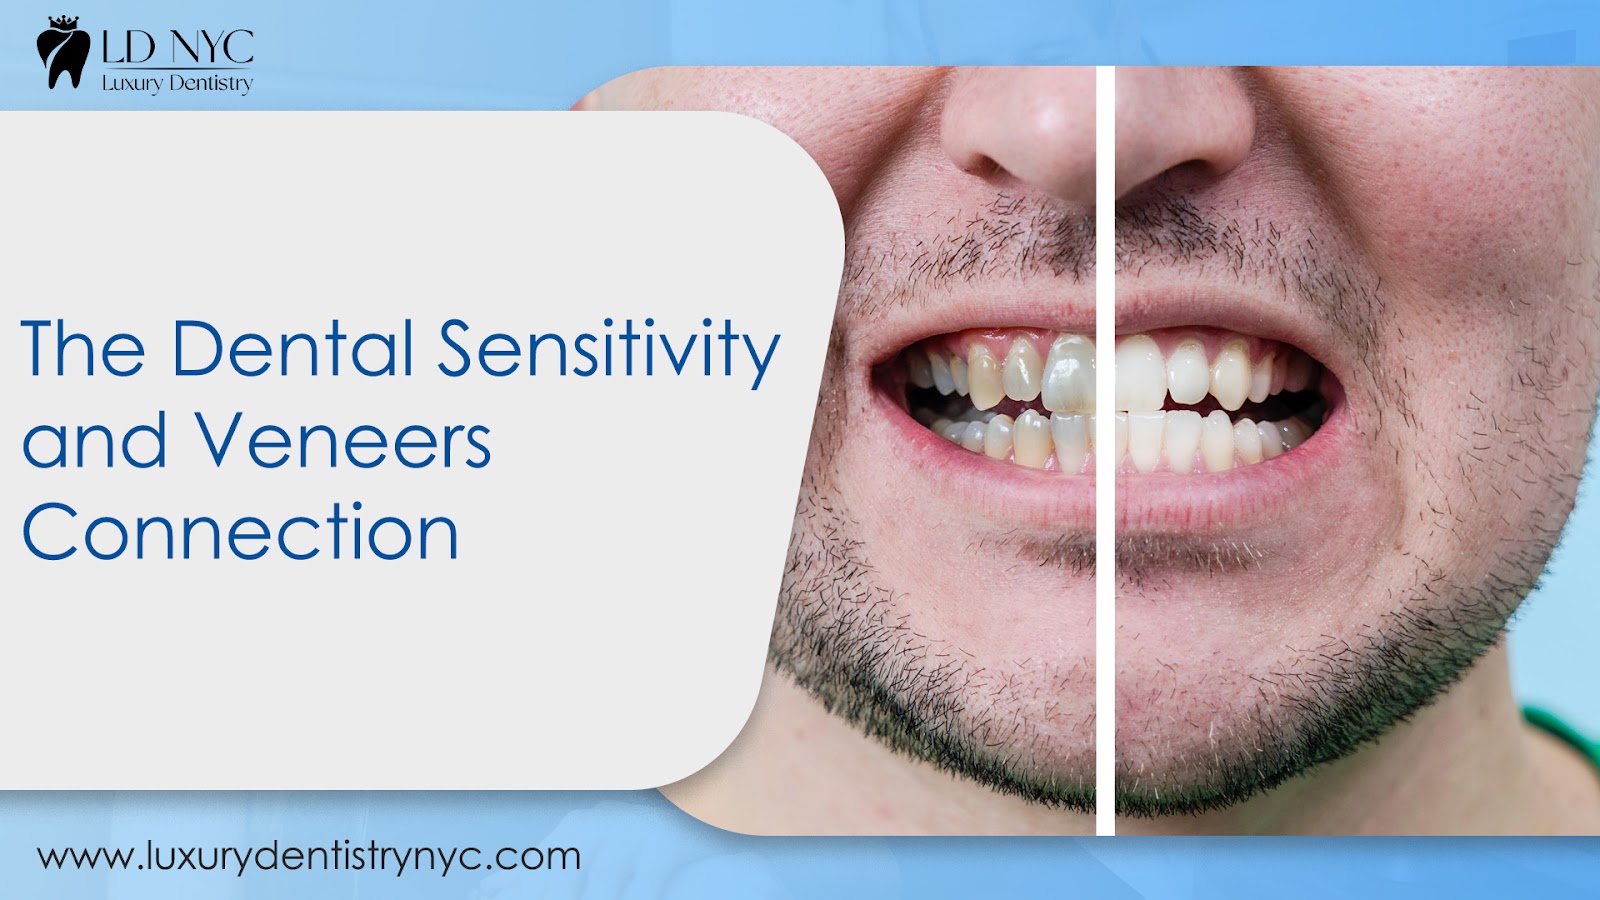 The Dental Sensitivity and Veneers Connection